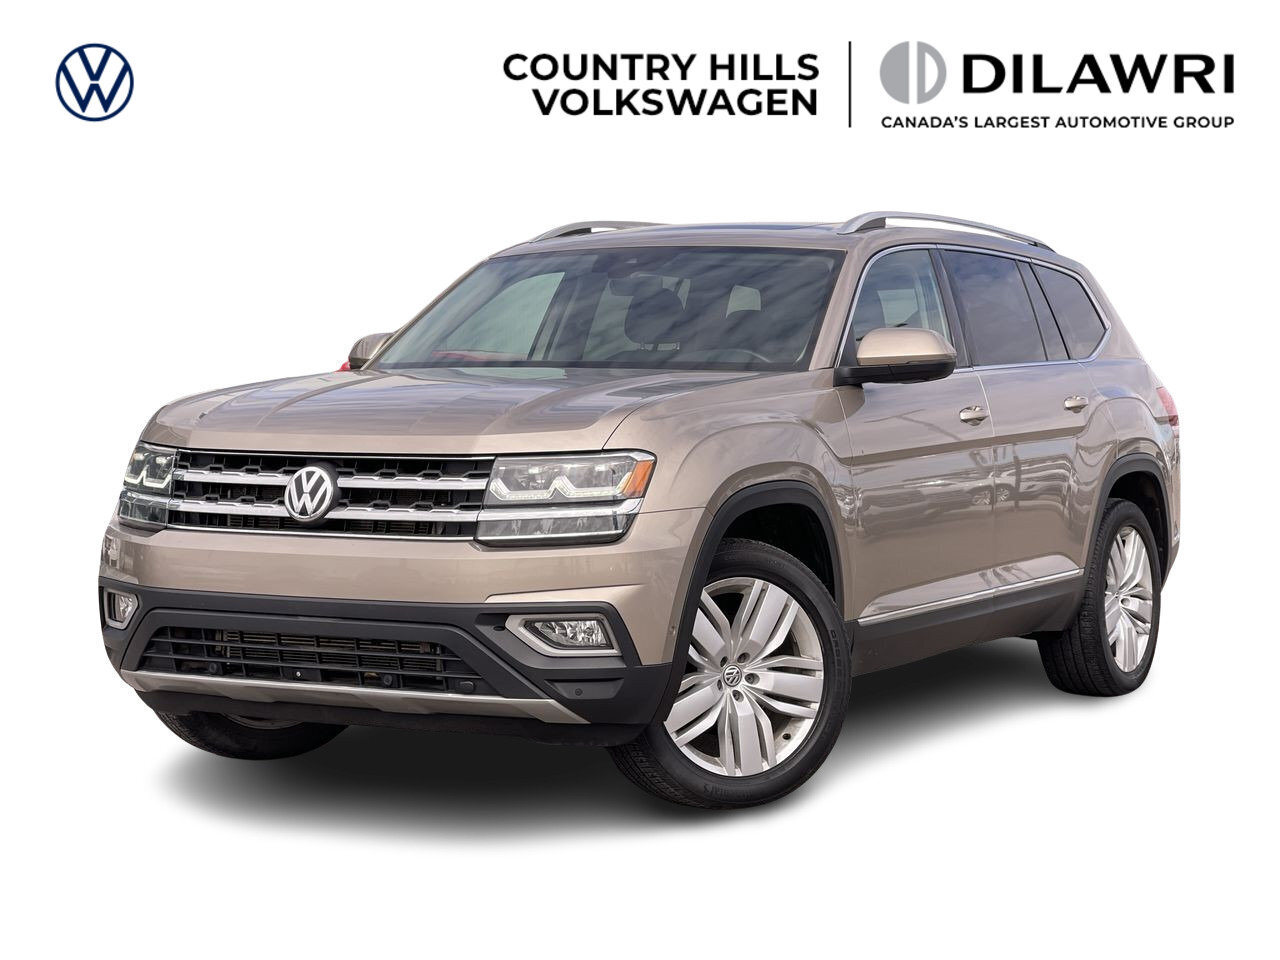 2018 Volkswagen Atlas Execline, AWD, Leather Locally Owned, One Owner, A